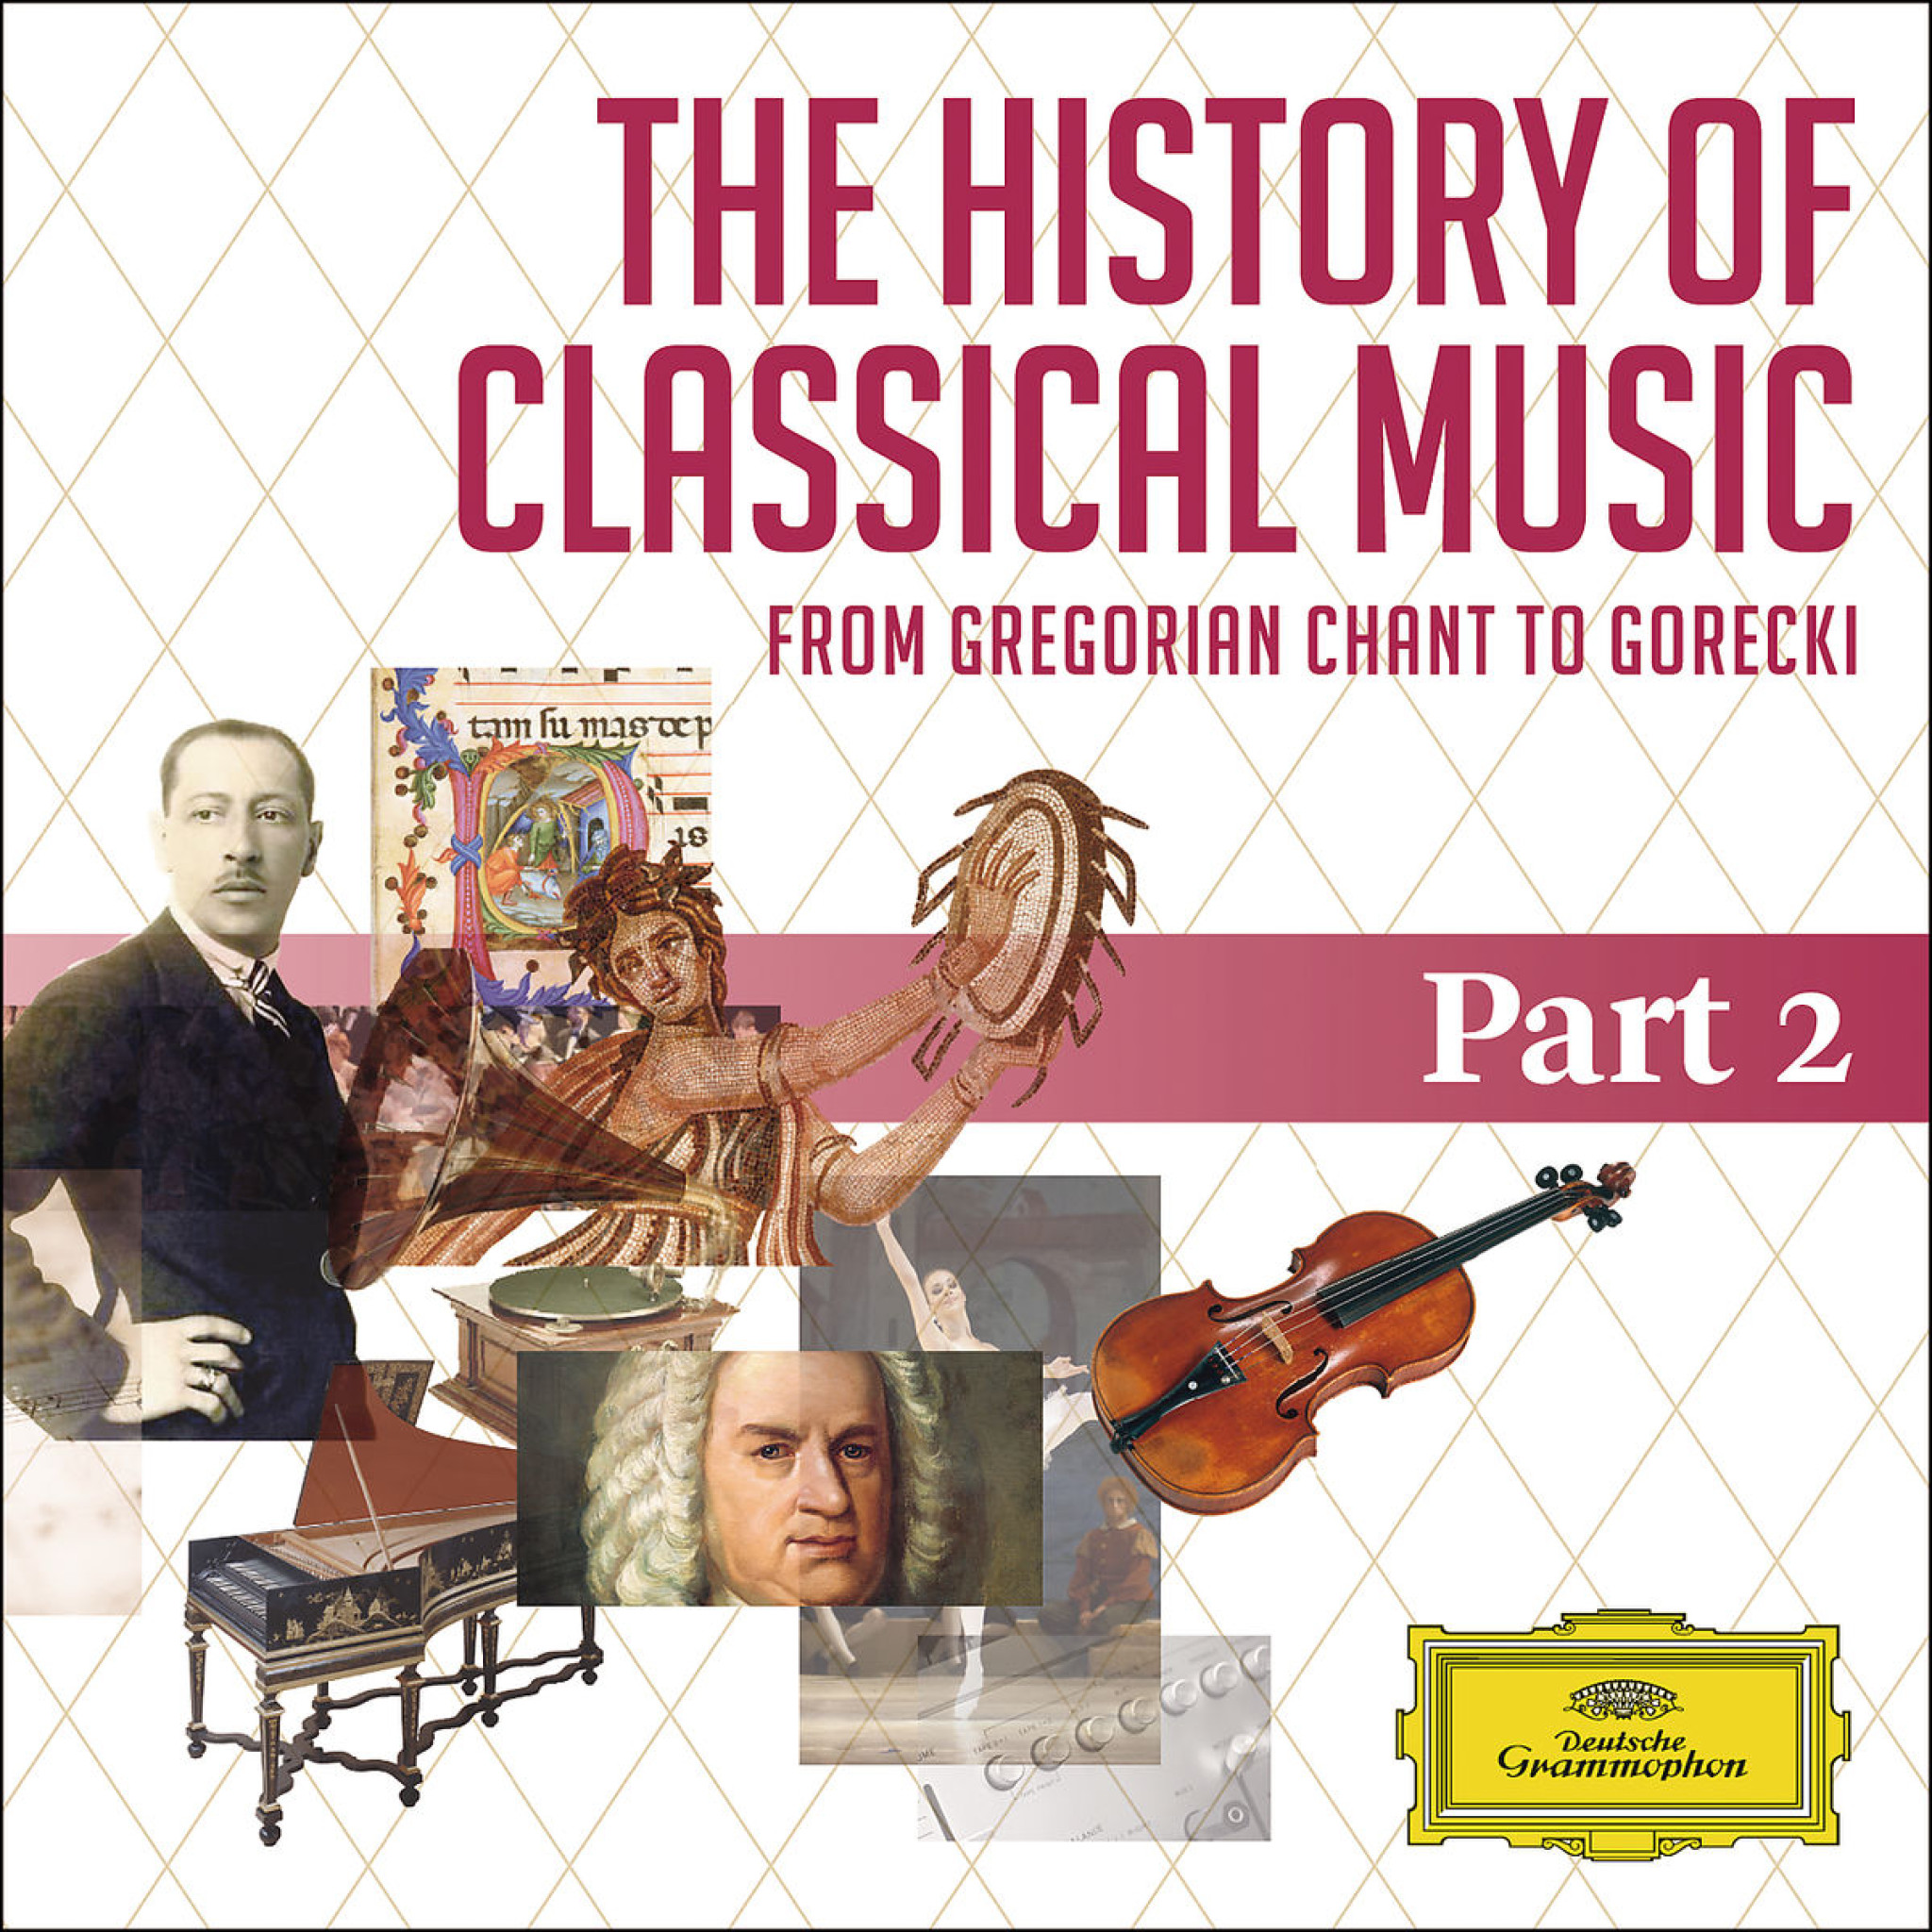 THE HISTORY OF CLASSICAL MUSIC